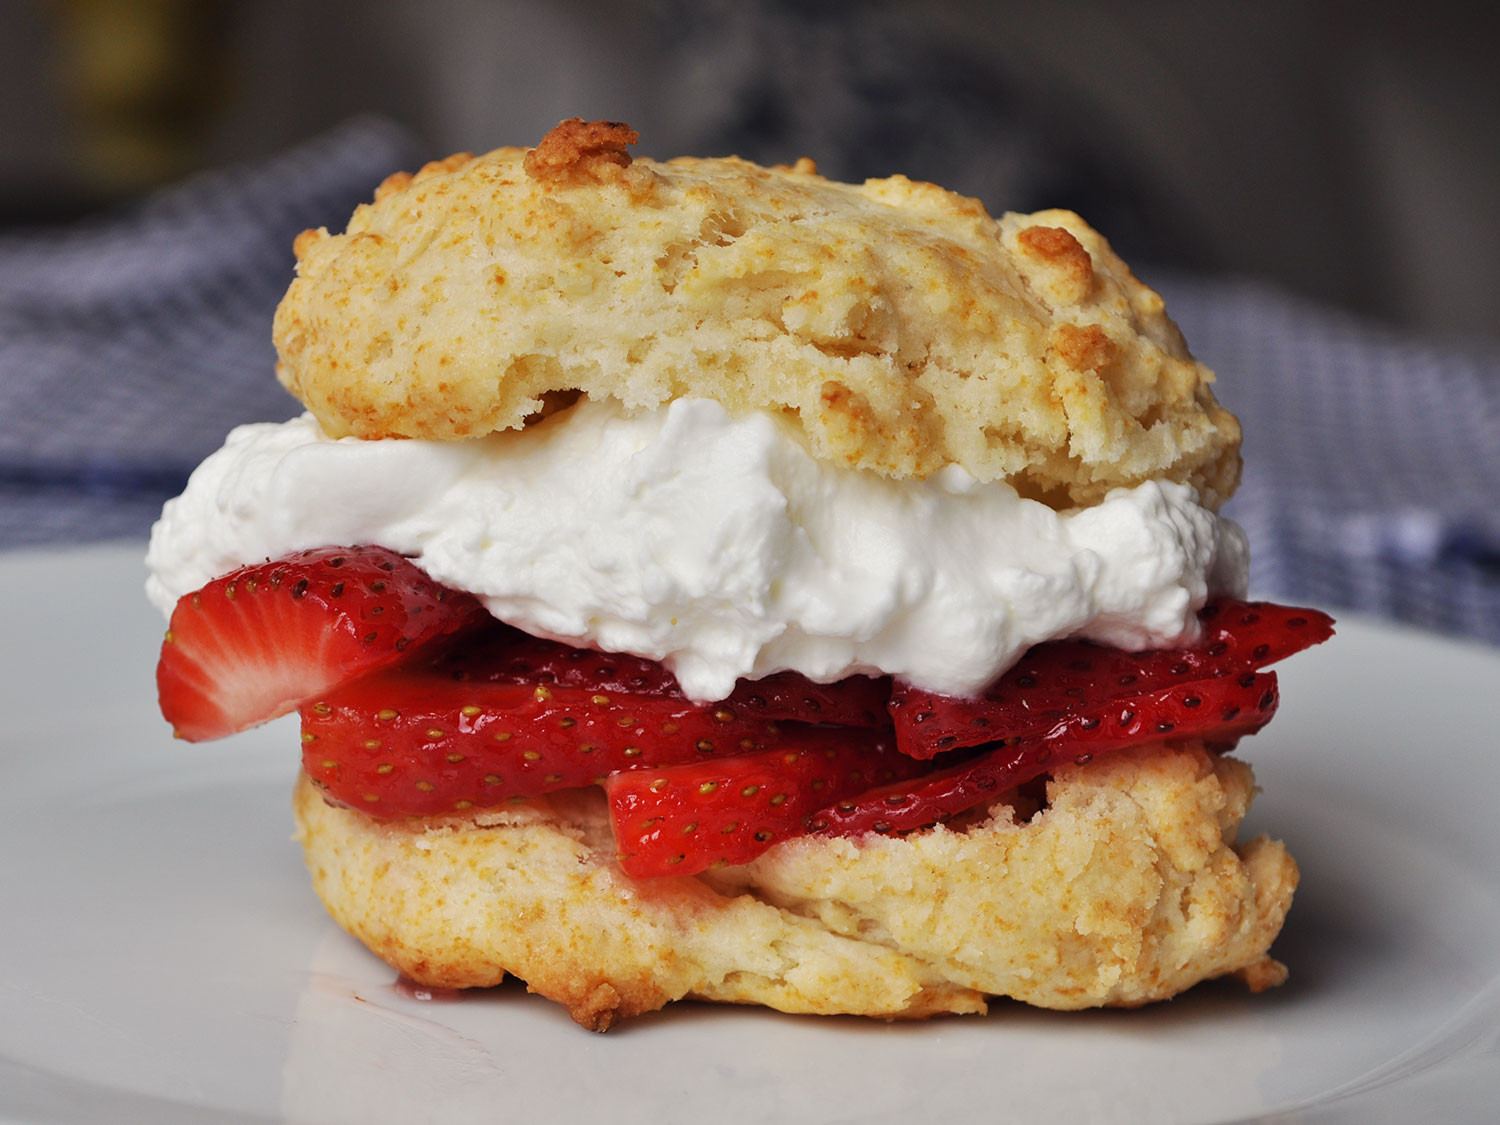 Quick Strawberry Shortcake Recipes
 The Best Quick and Easy Strawberry Shortcakes